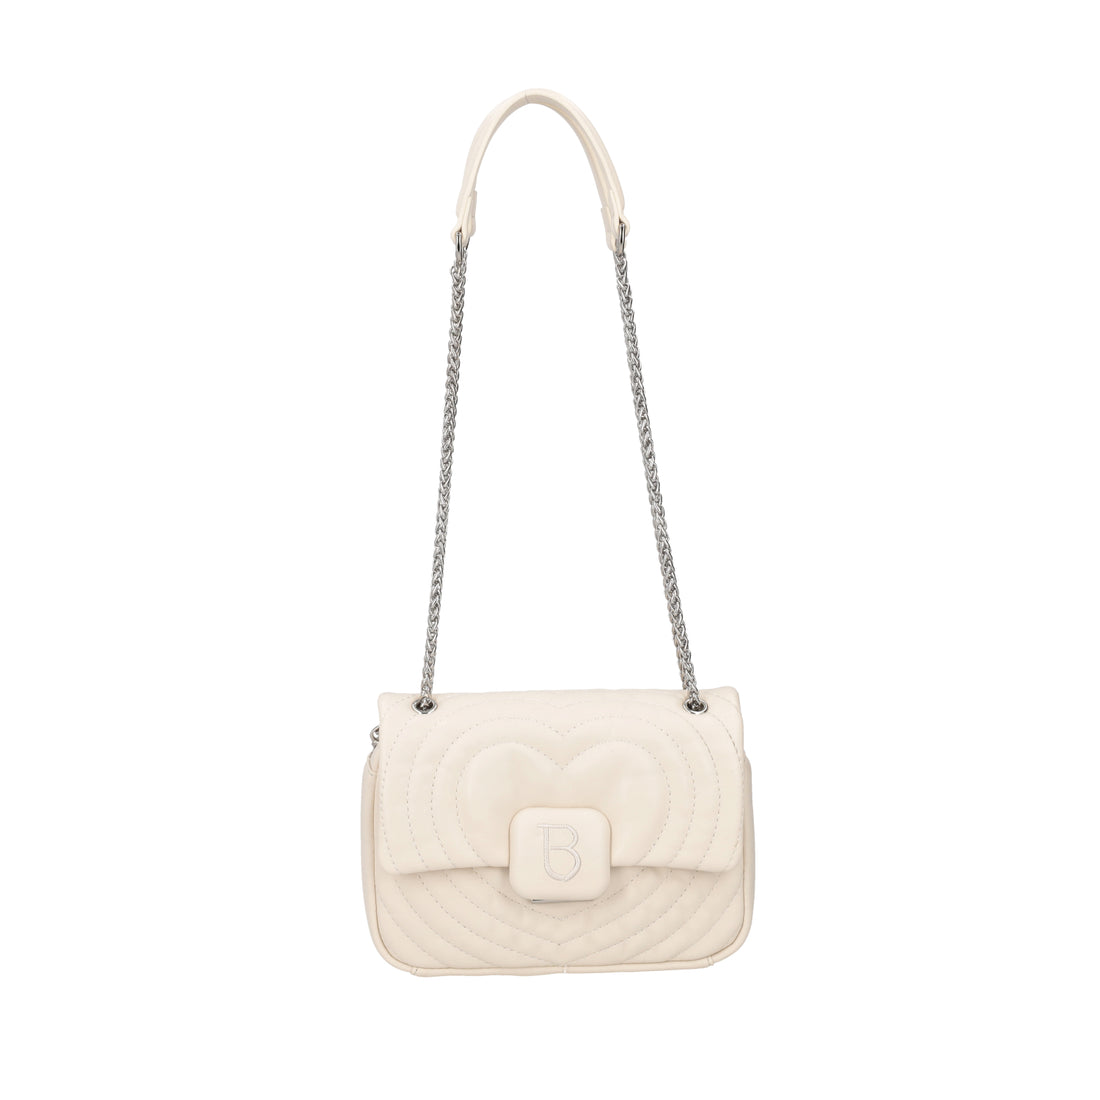 SMALL “SACHER” BAG IN IVORY